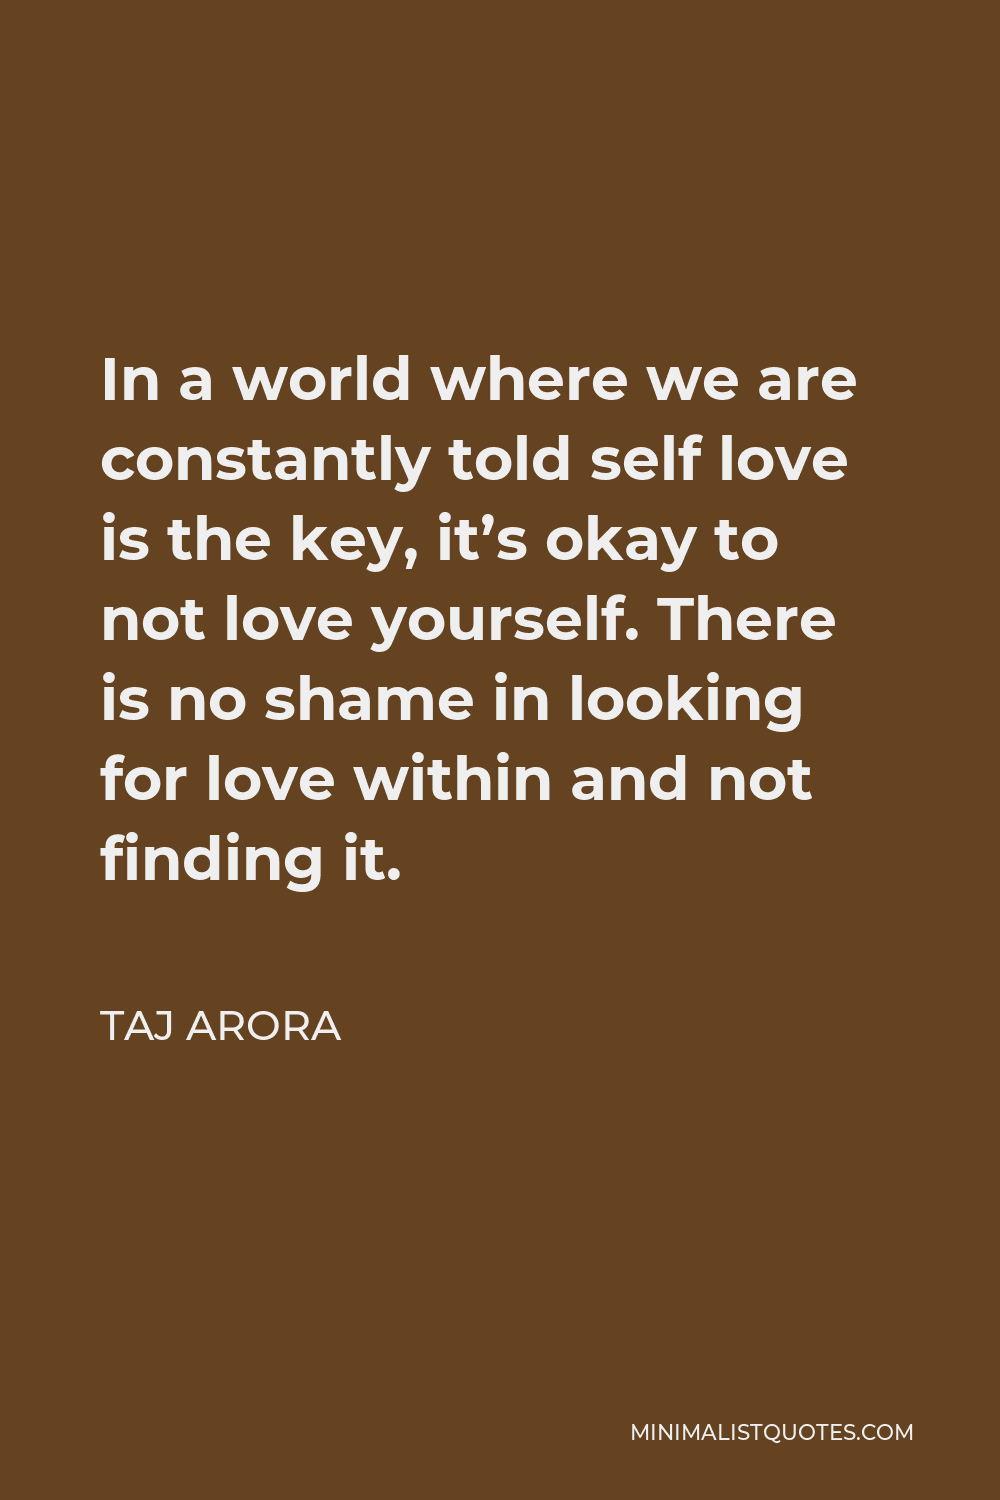 Taj Arora Quote - In a world where we are constantly told self love is the key, it’s okay to not love yourself. There is no shame in looking for love within and not finding it.